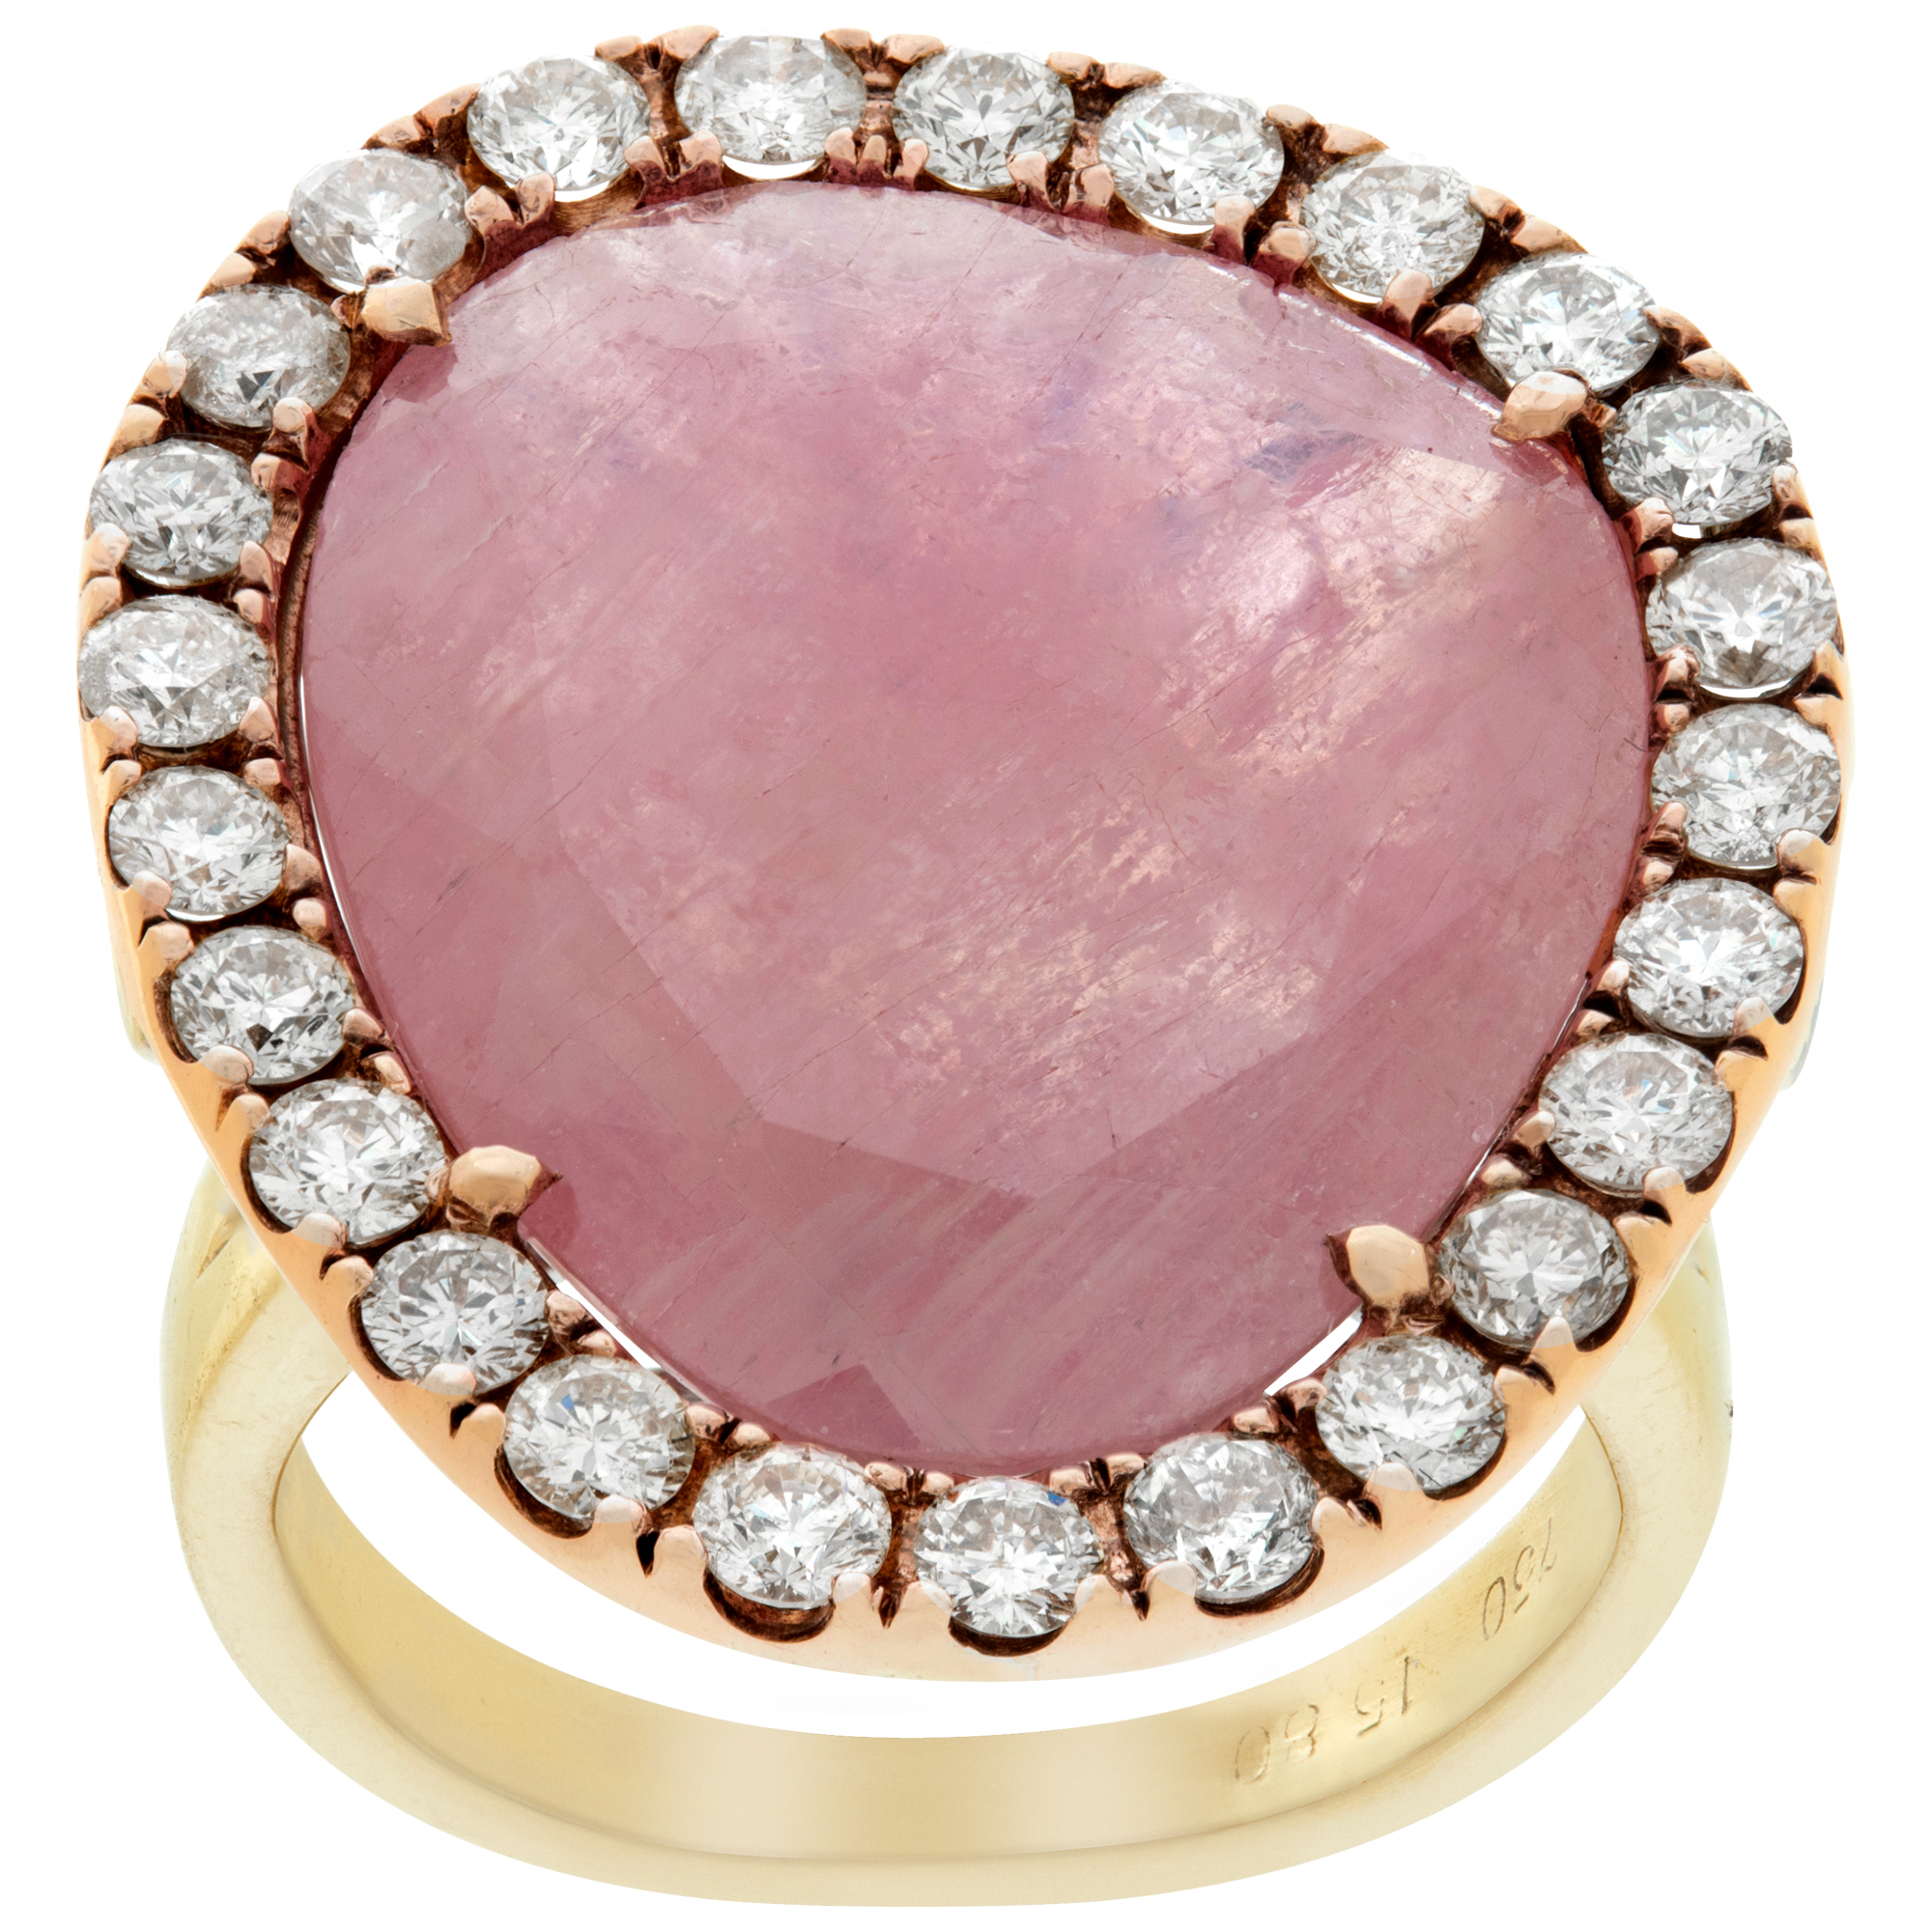 Rose quartz faceted ring with 1.00ct in surrounding diamonds in 18k white & rose gold